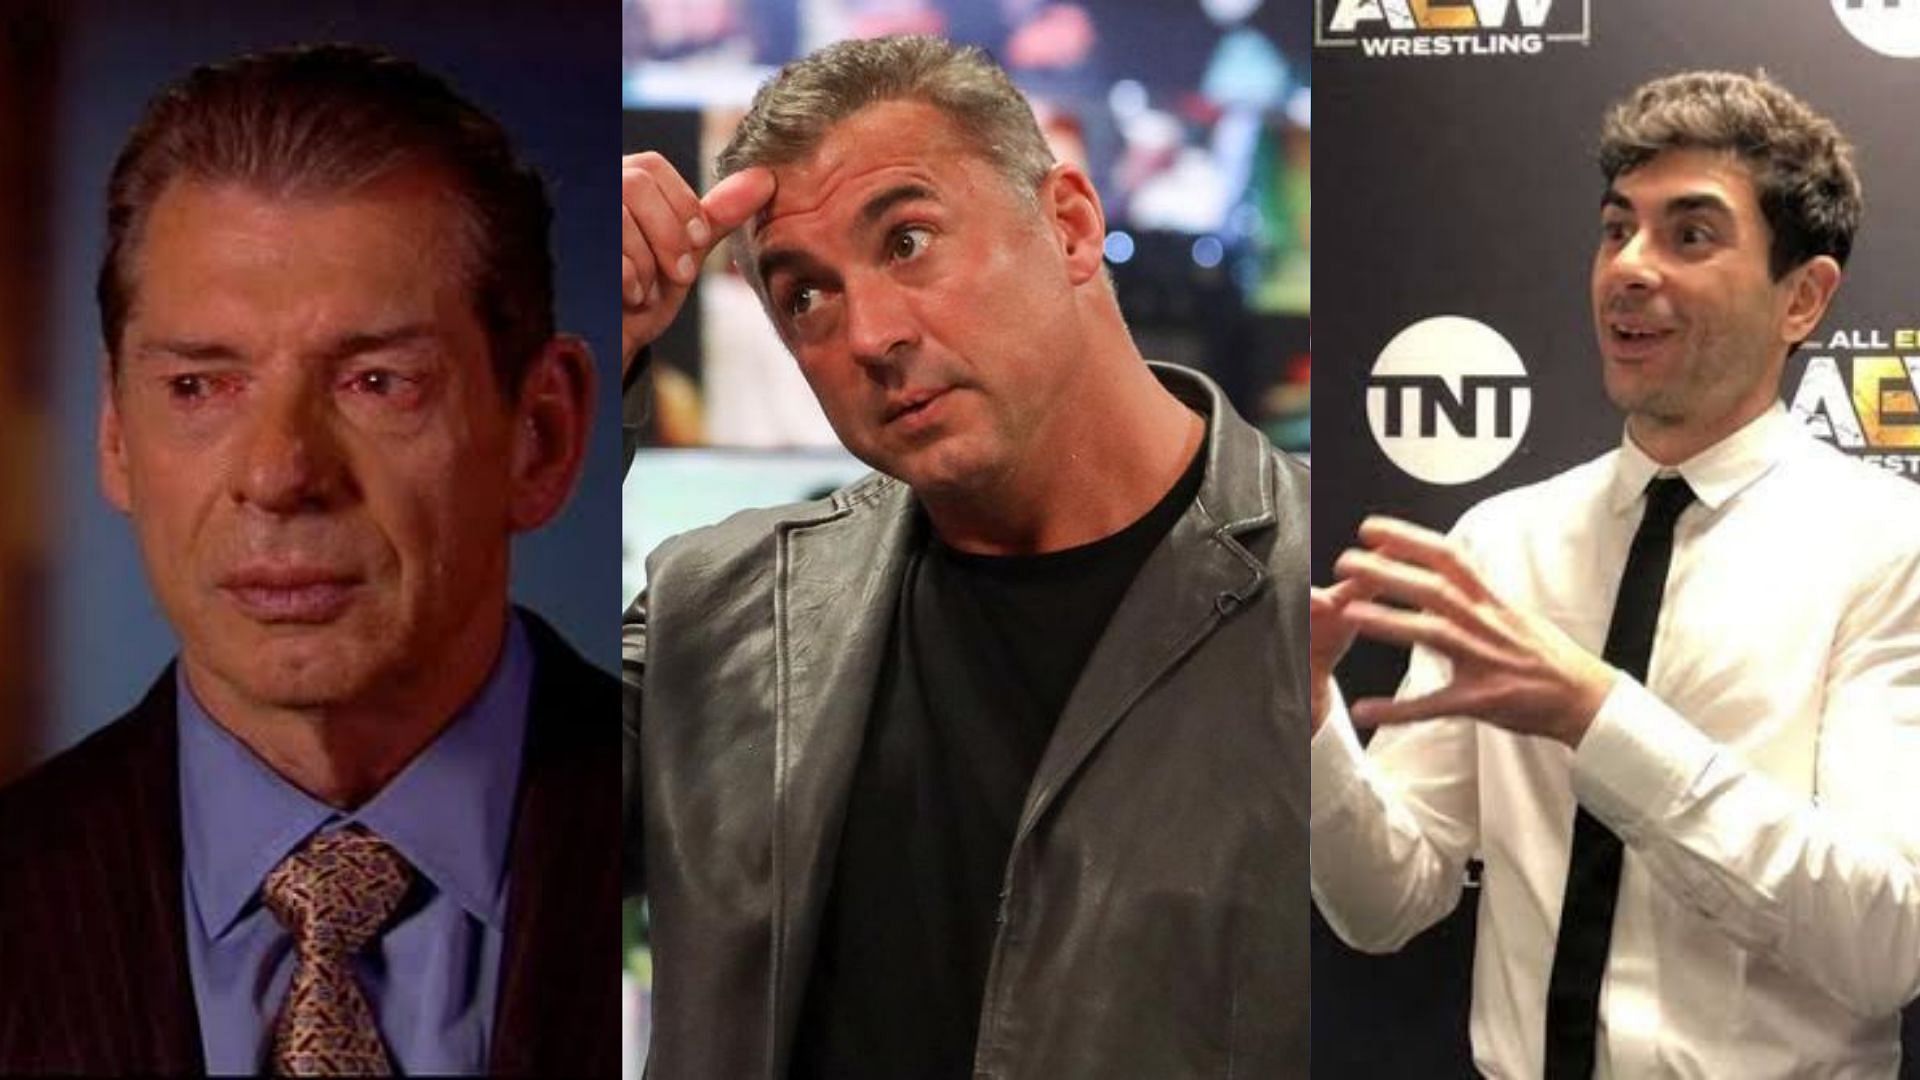 Could Shane McMahon become All Elite?